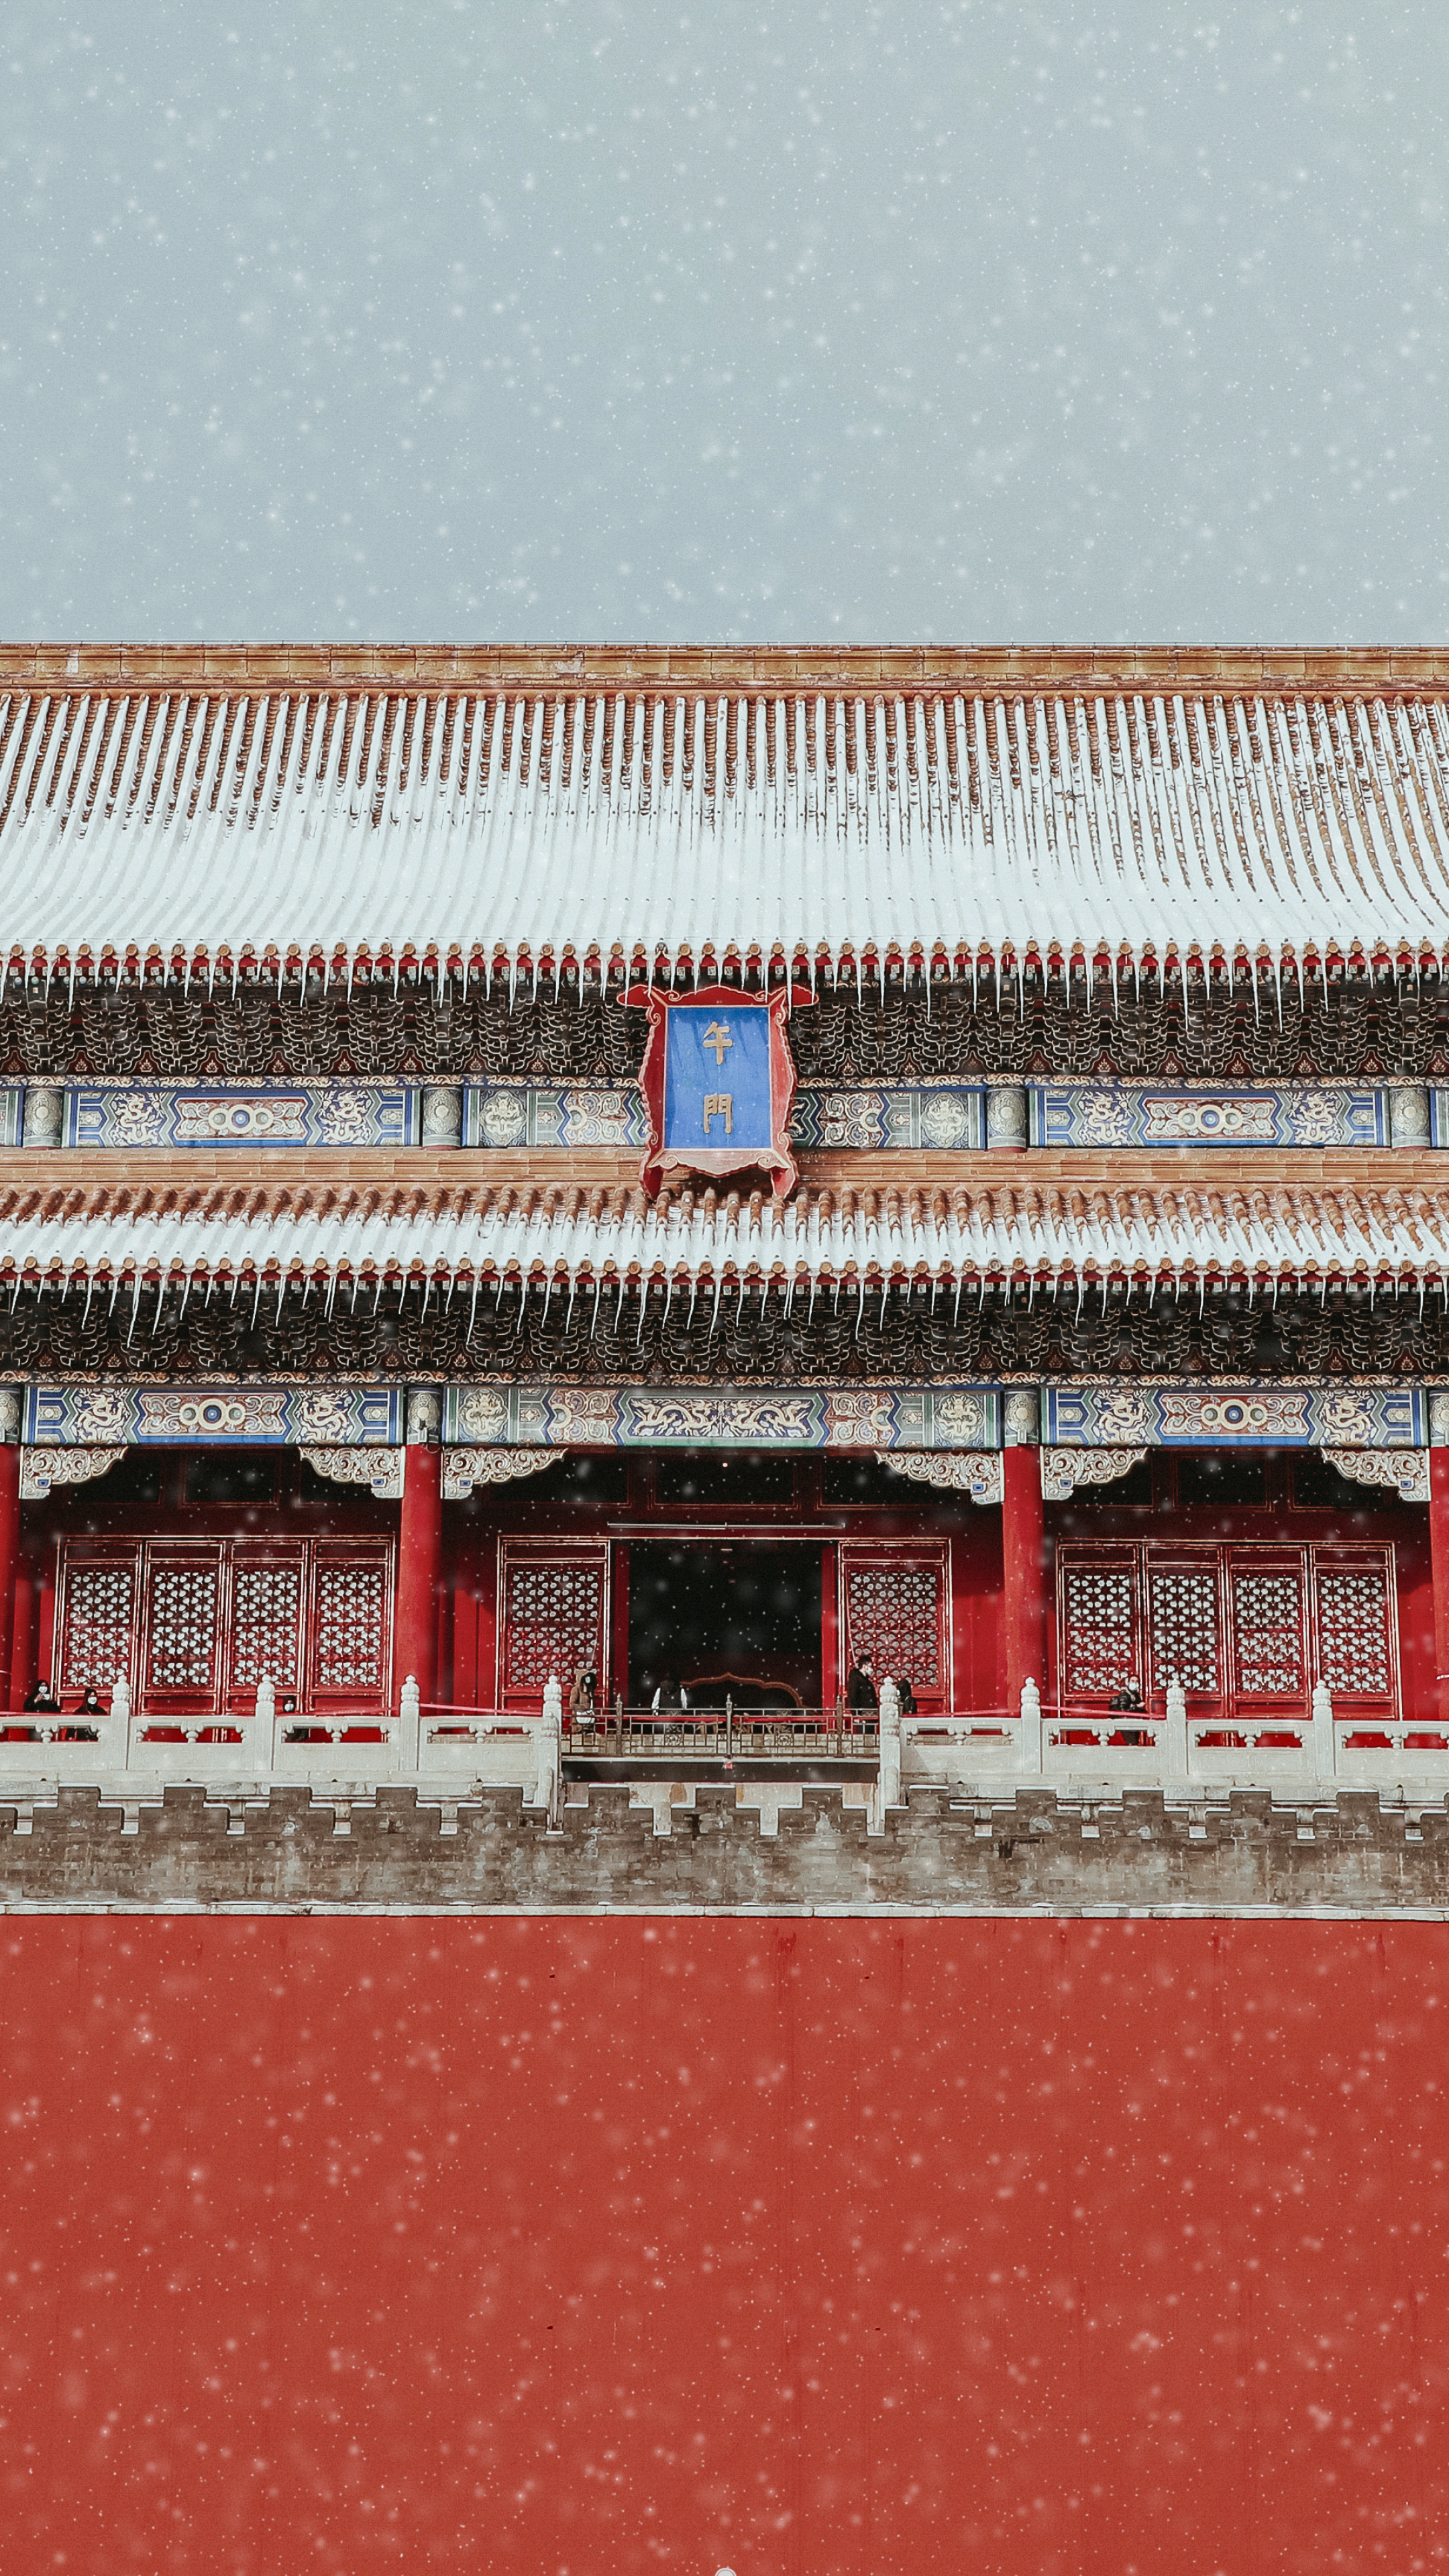 Forbidden City, Cultural heritage, Ancient palace, Chinese legacy, 2160x3840 4K Phone